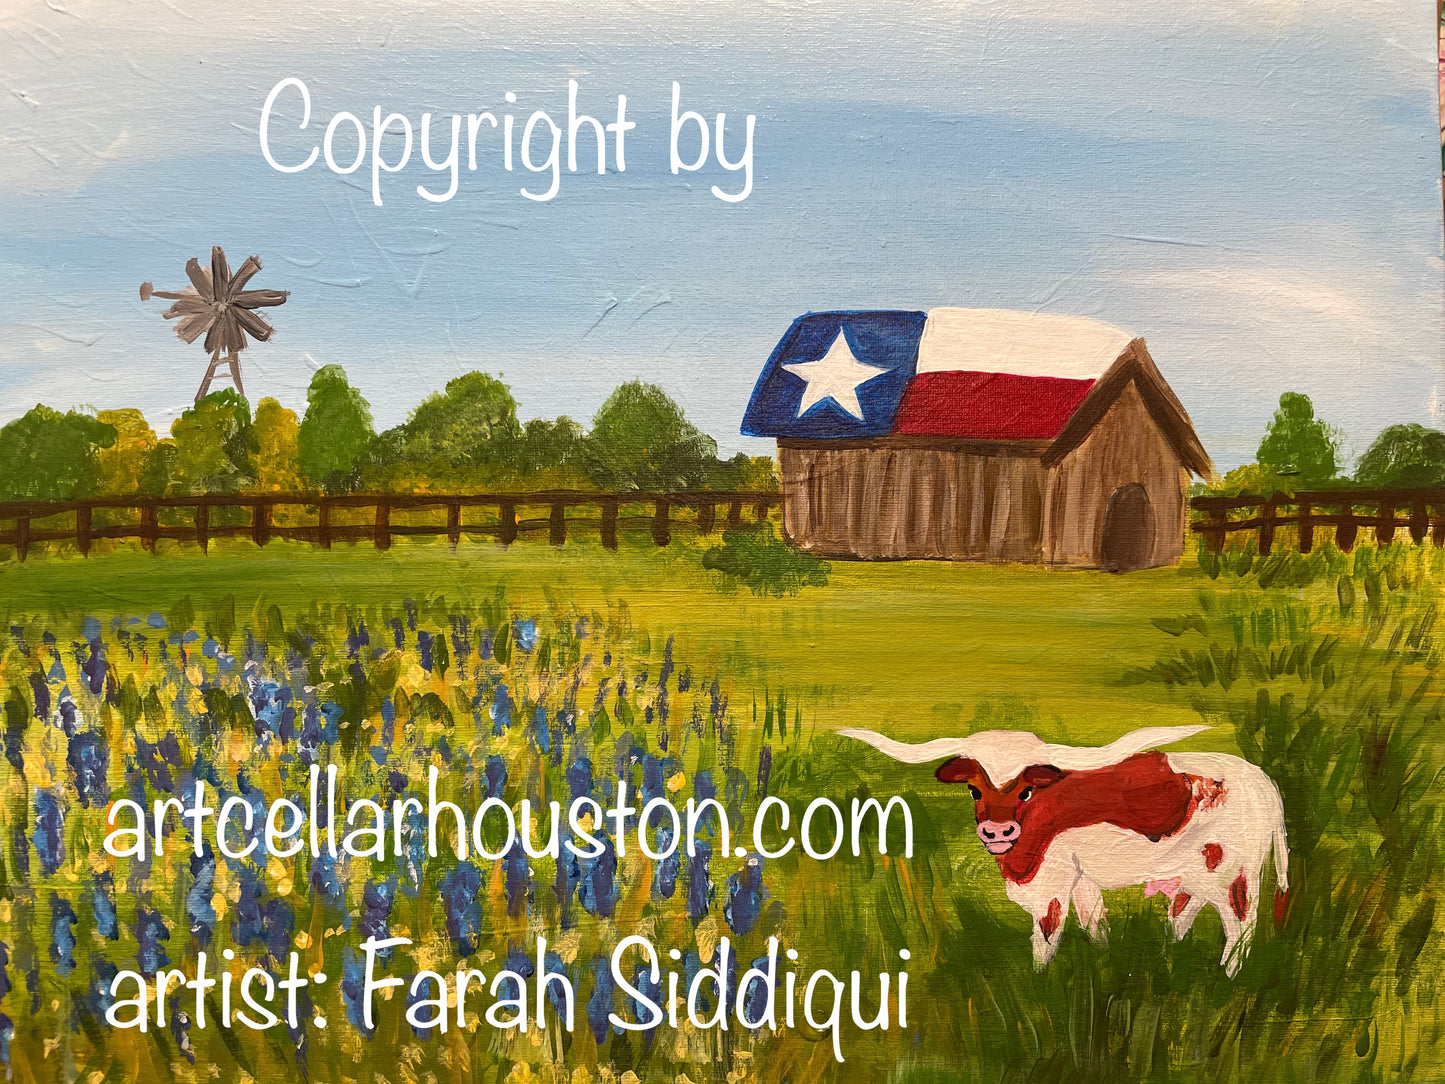 Wed, Mar 1st, 4-6P Kids Paint “A Texas Day” Public Houston Painting Class